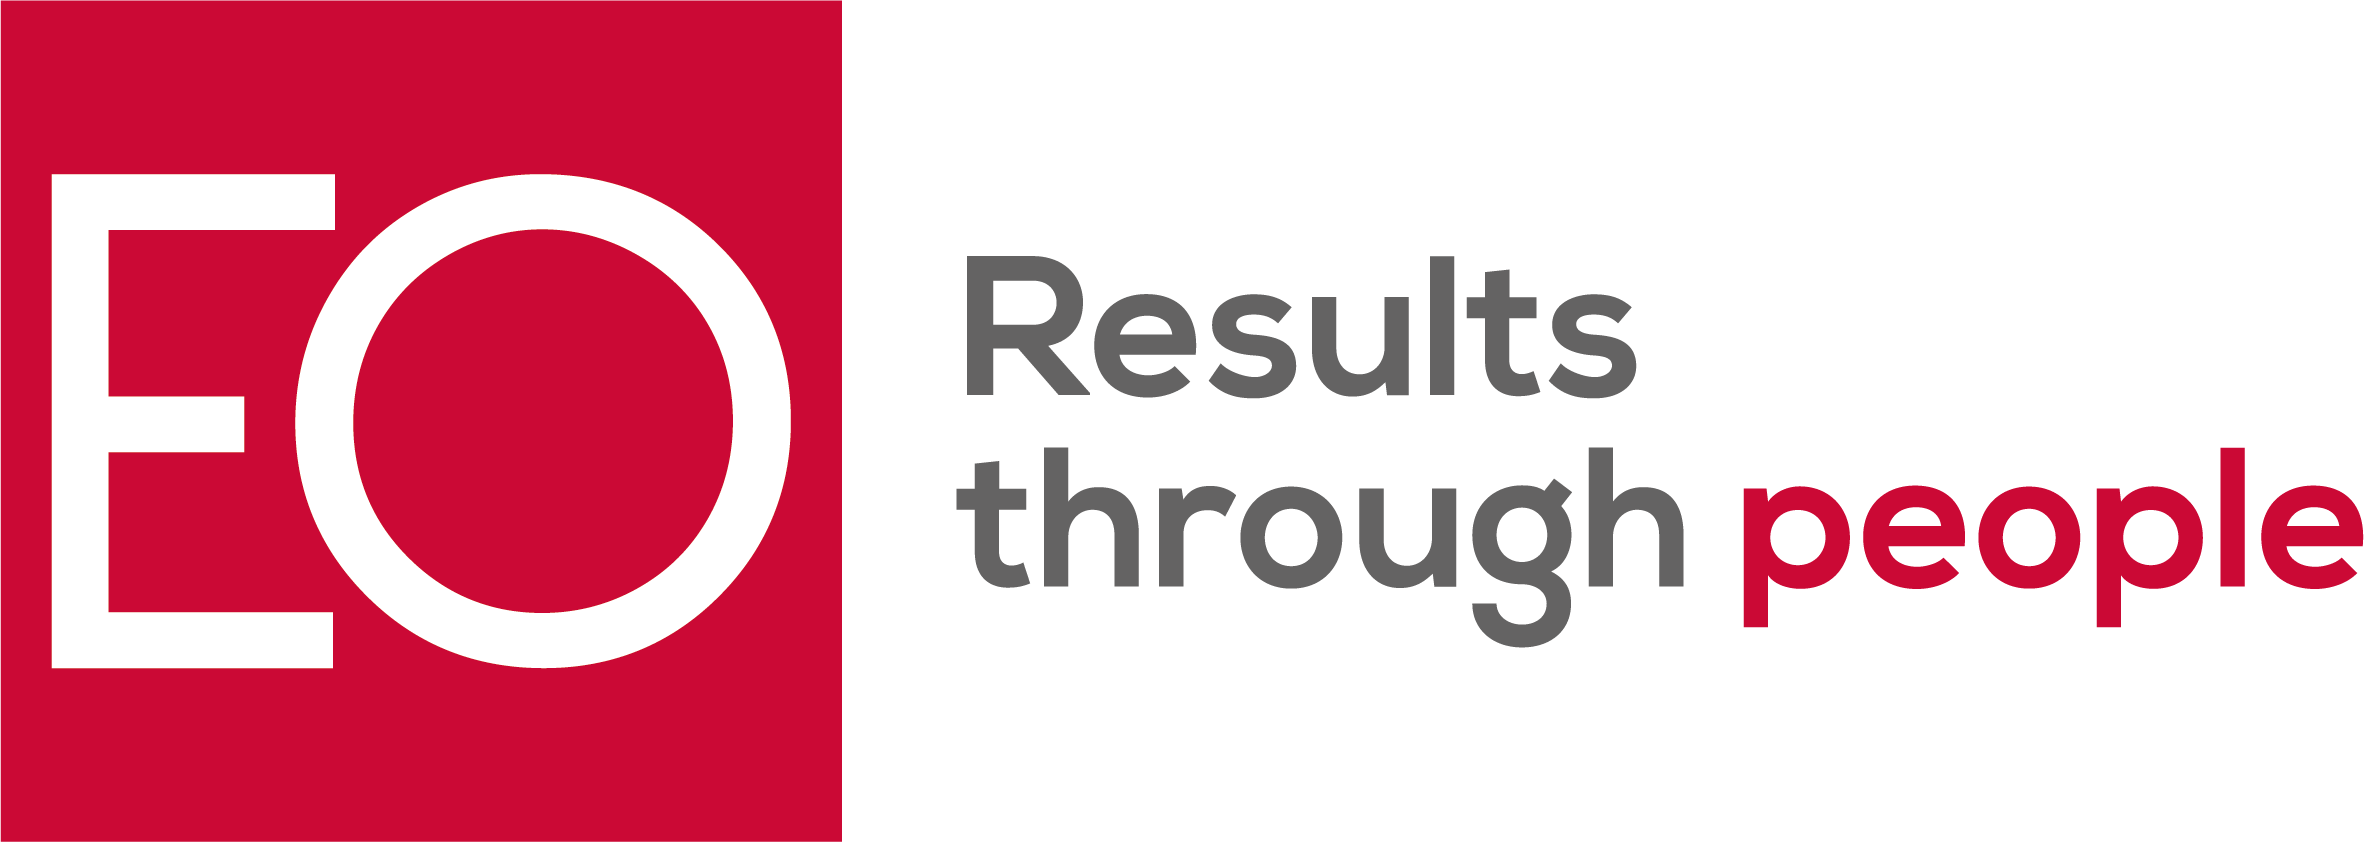 EO Executives - Results through people